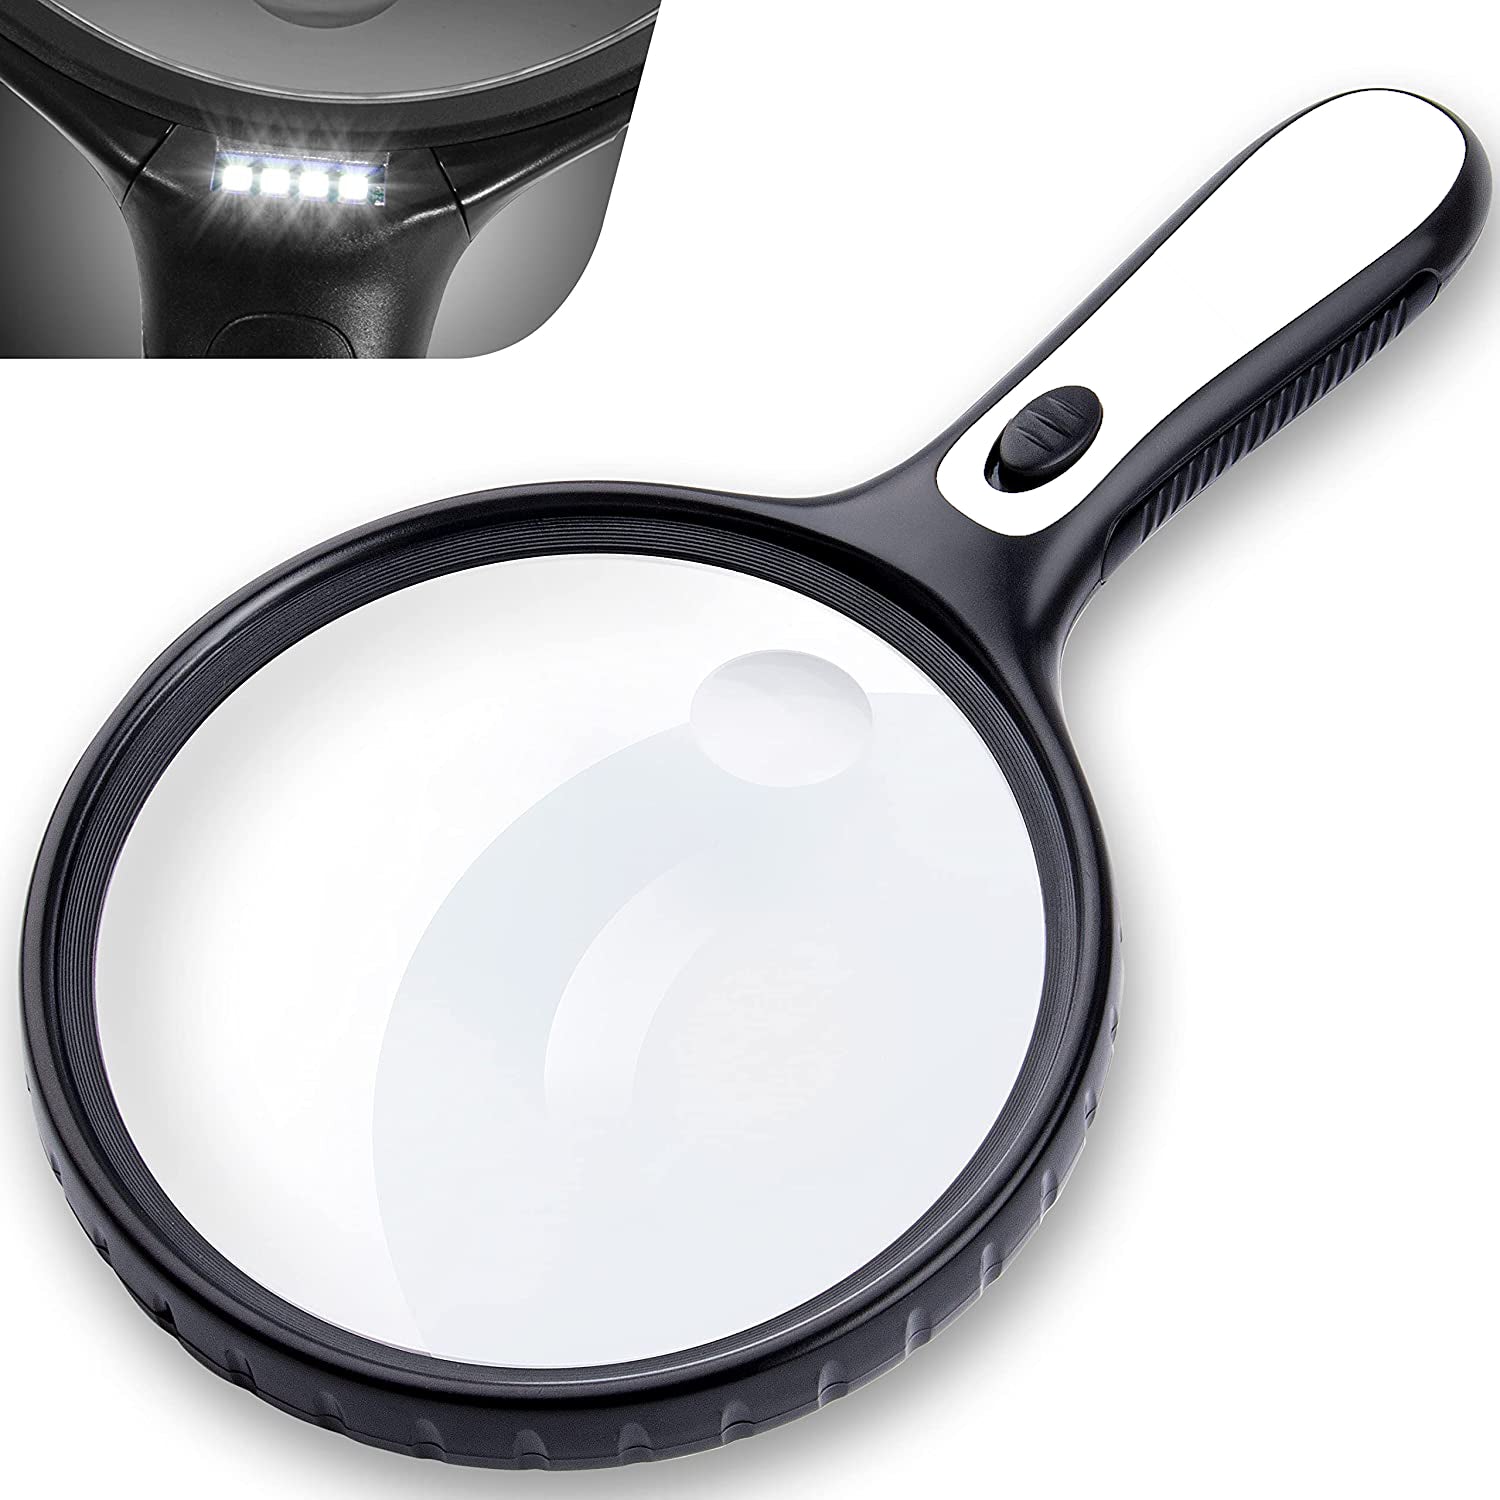 Magnifier, 2X 5X Lighted Hands Free Magnifying Glass with Light Stand -  130mm Large Illuminated Desktop Magnifier for Reading, Inspection,  Soldering